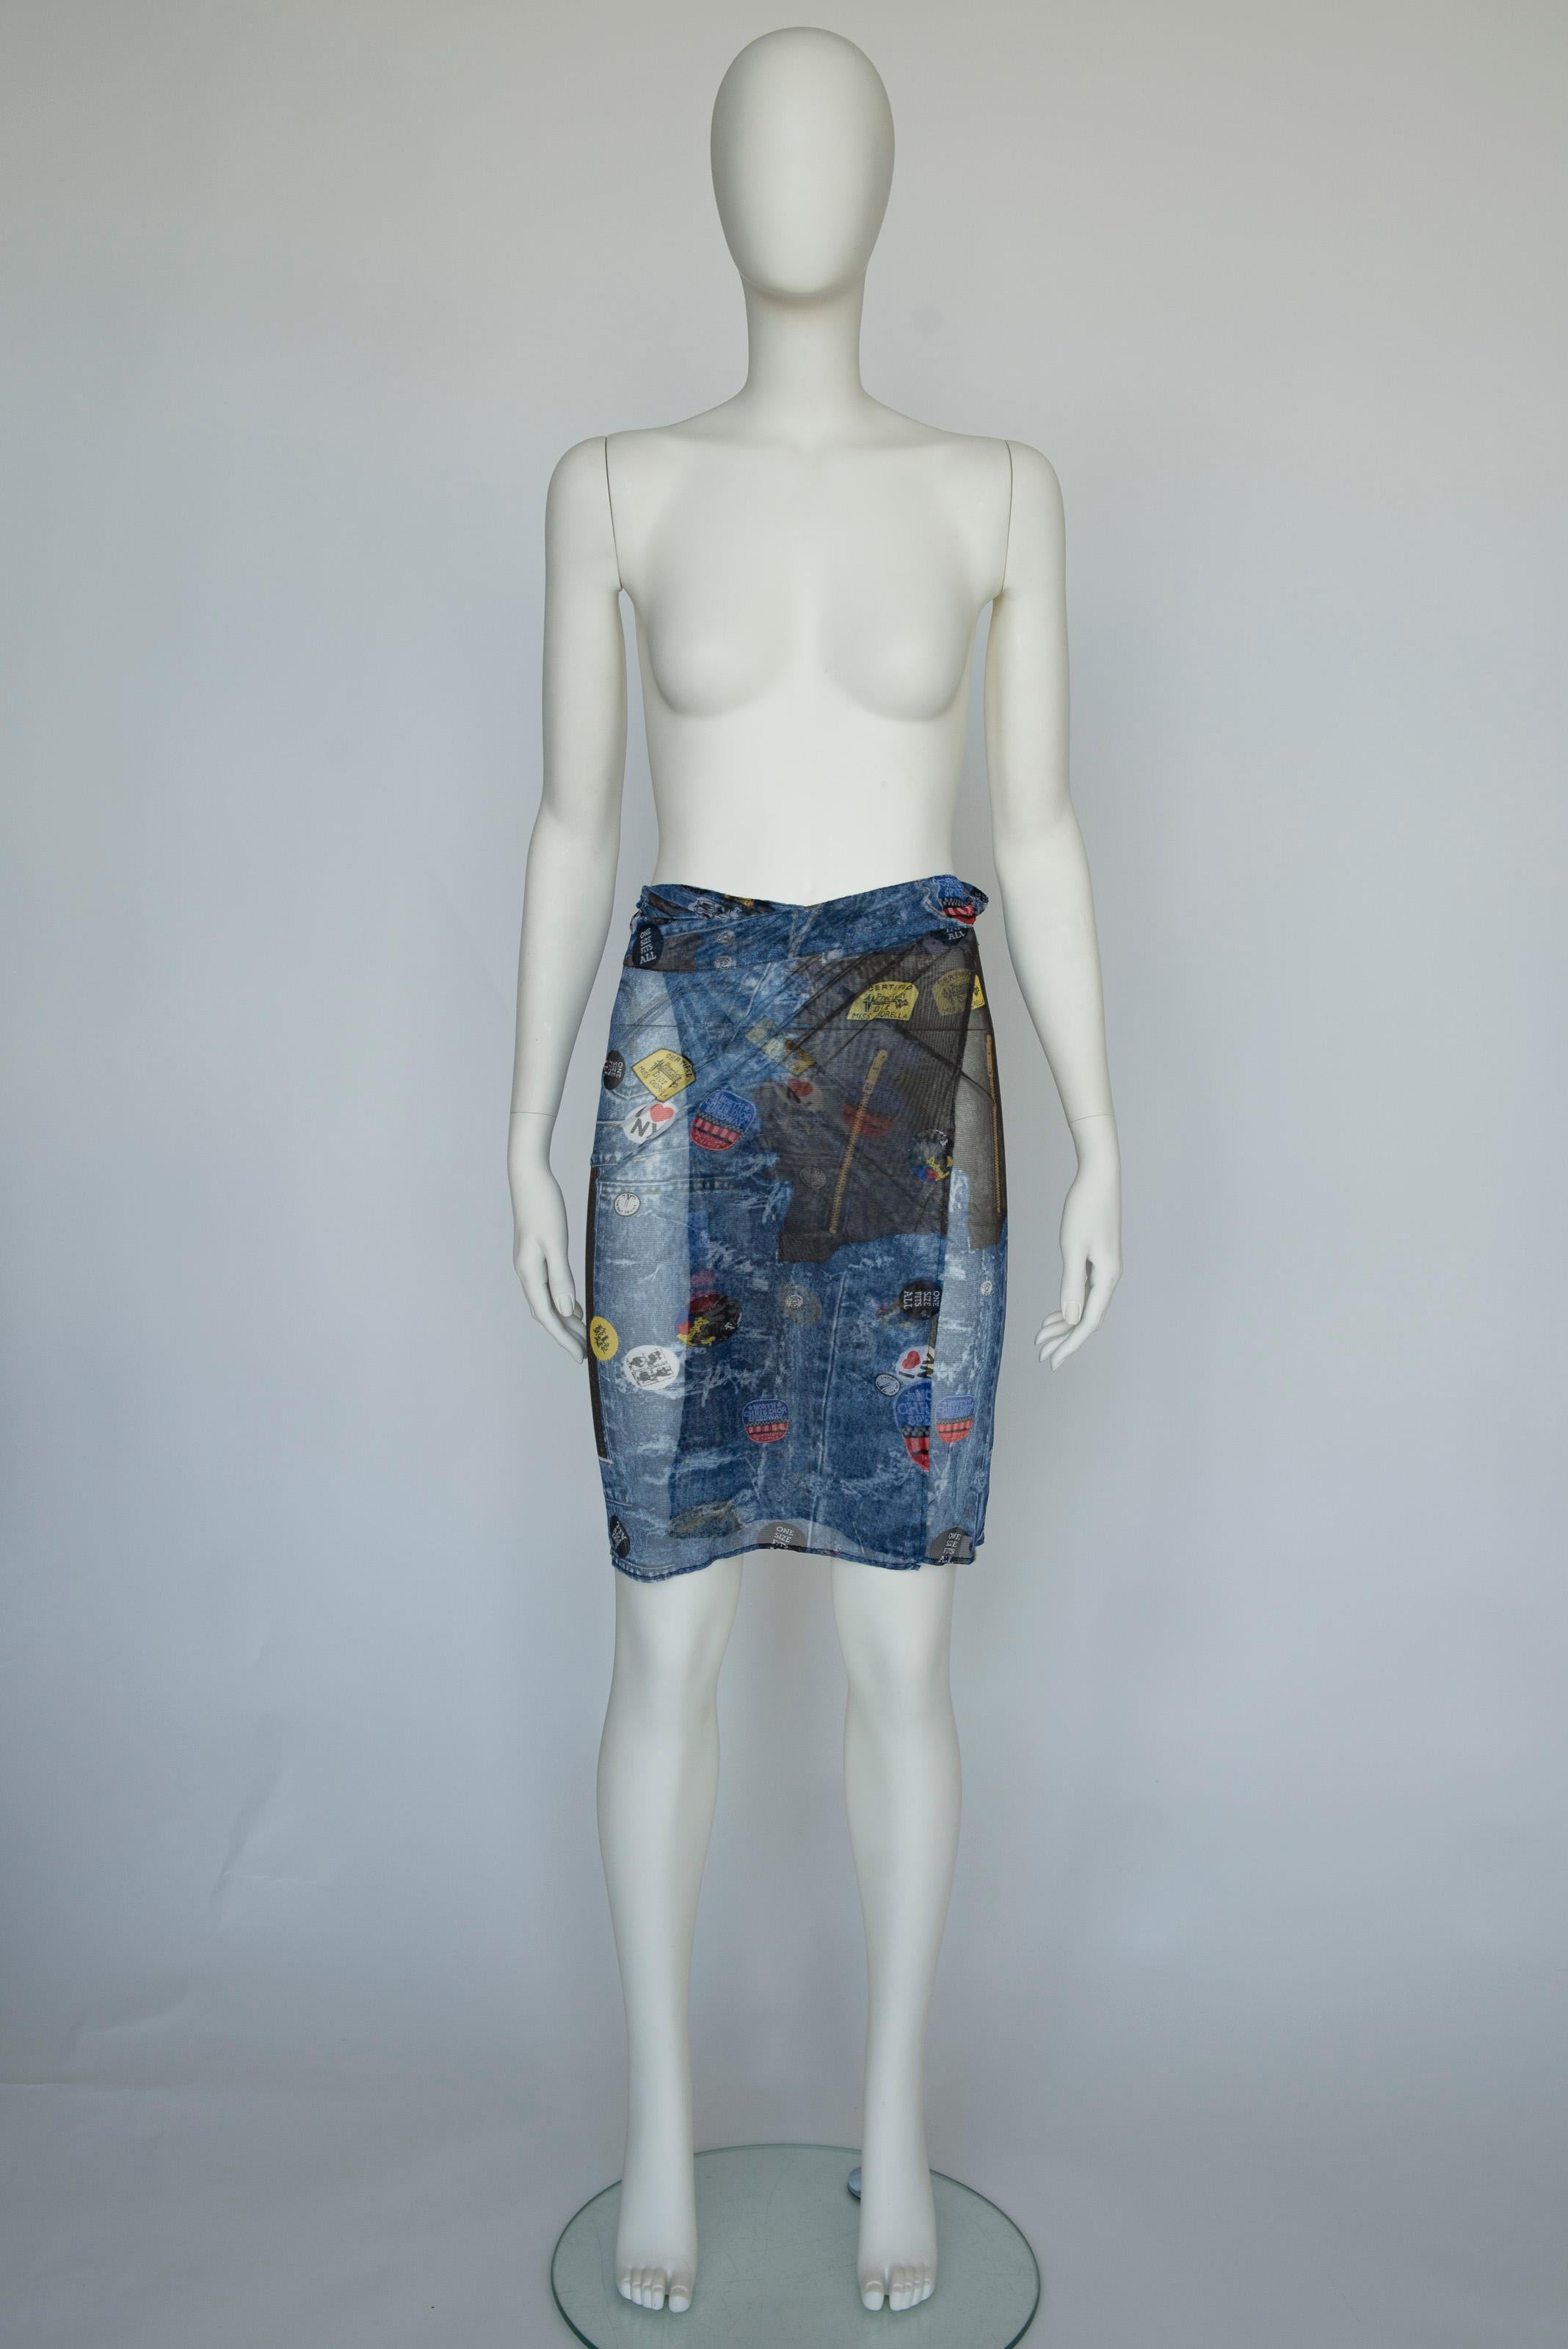 From the unforgettable John Galliano years for Christian Dior, this sheer pareo/sarong features the iconic 